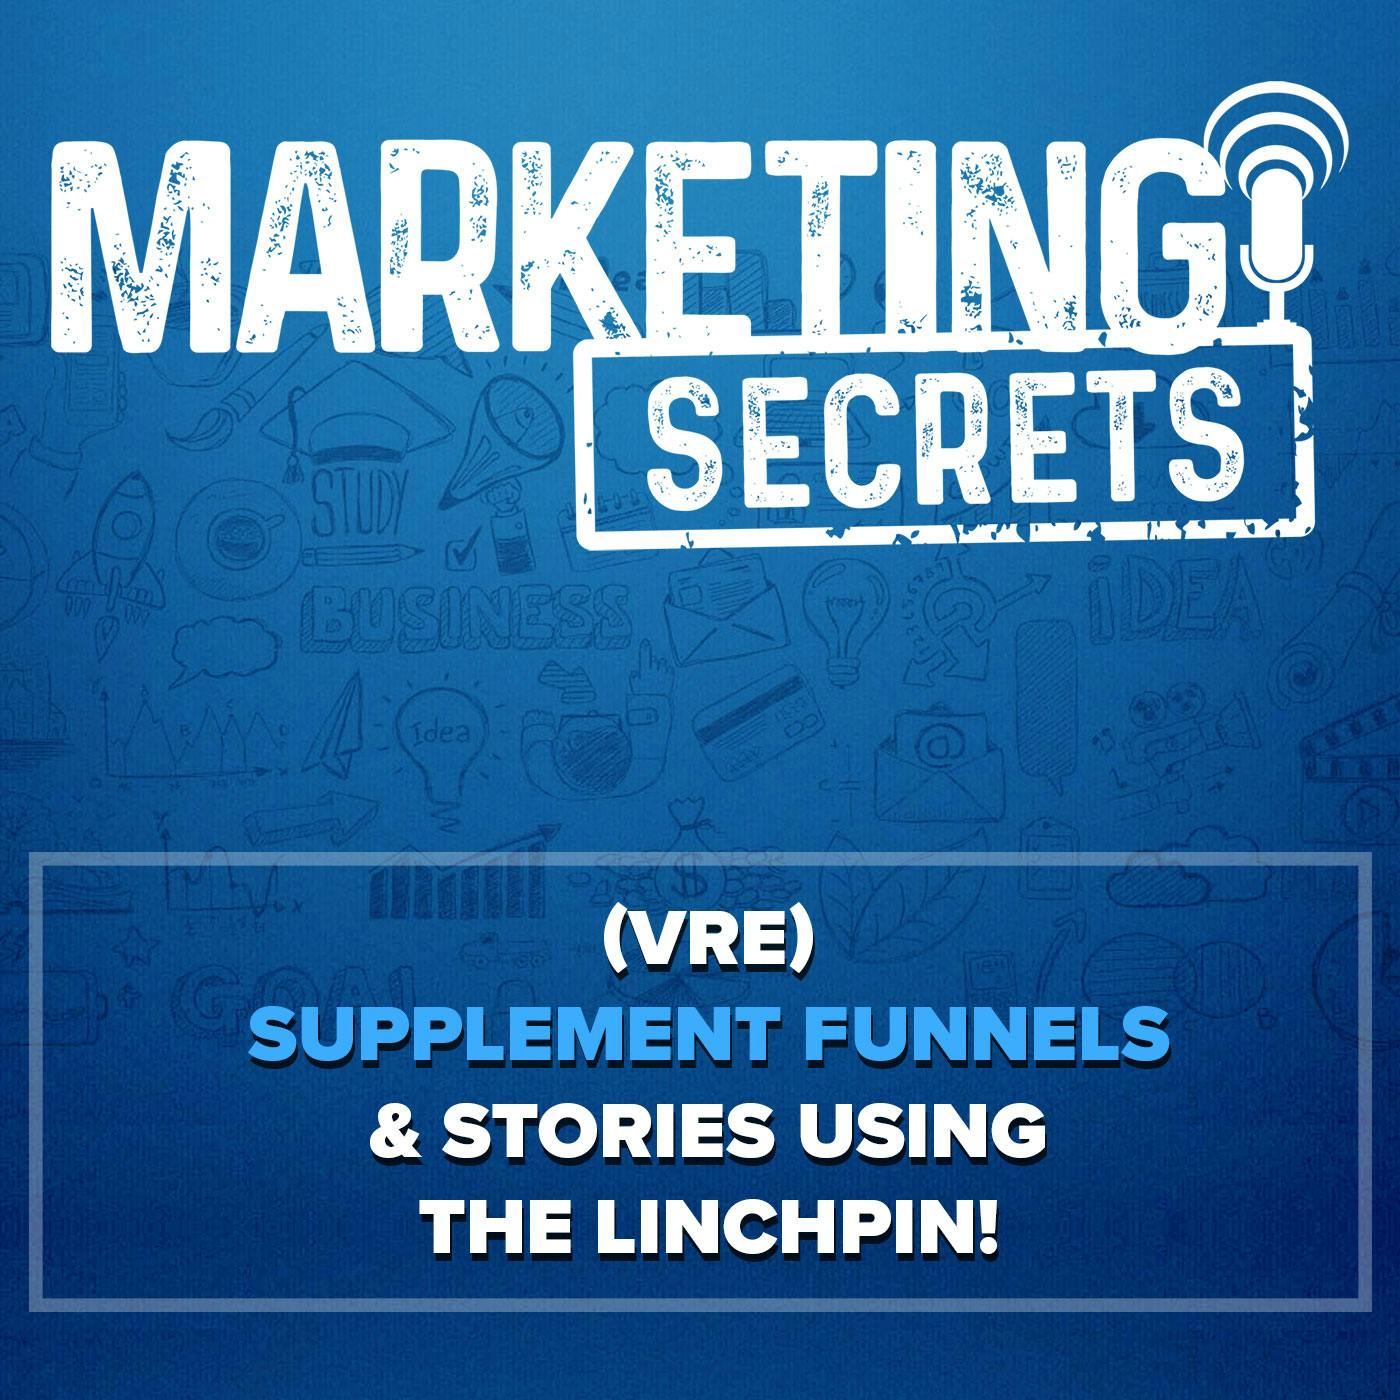 (VRE) Supplement Funnels & Stories Using The Linchpin!